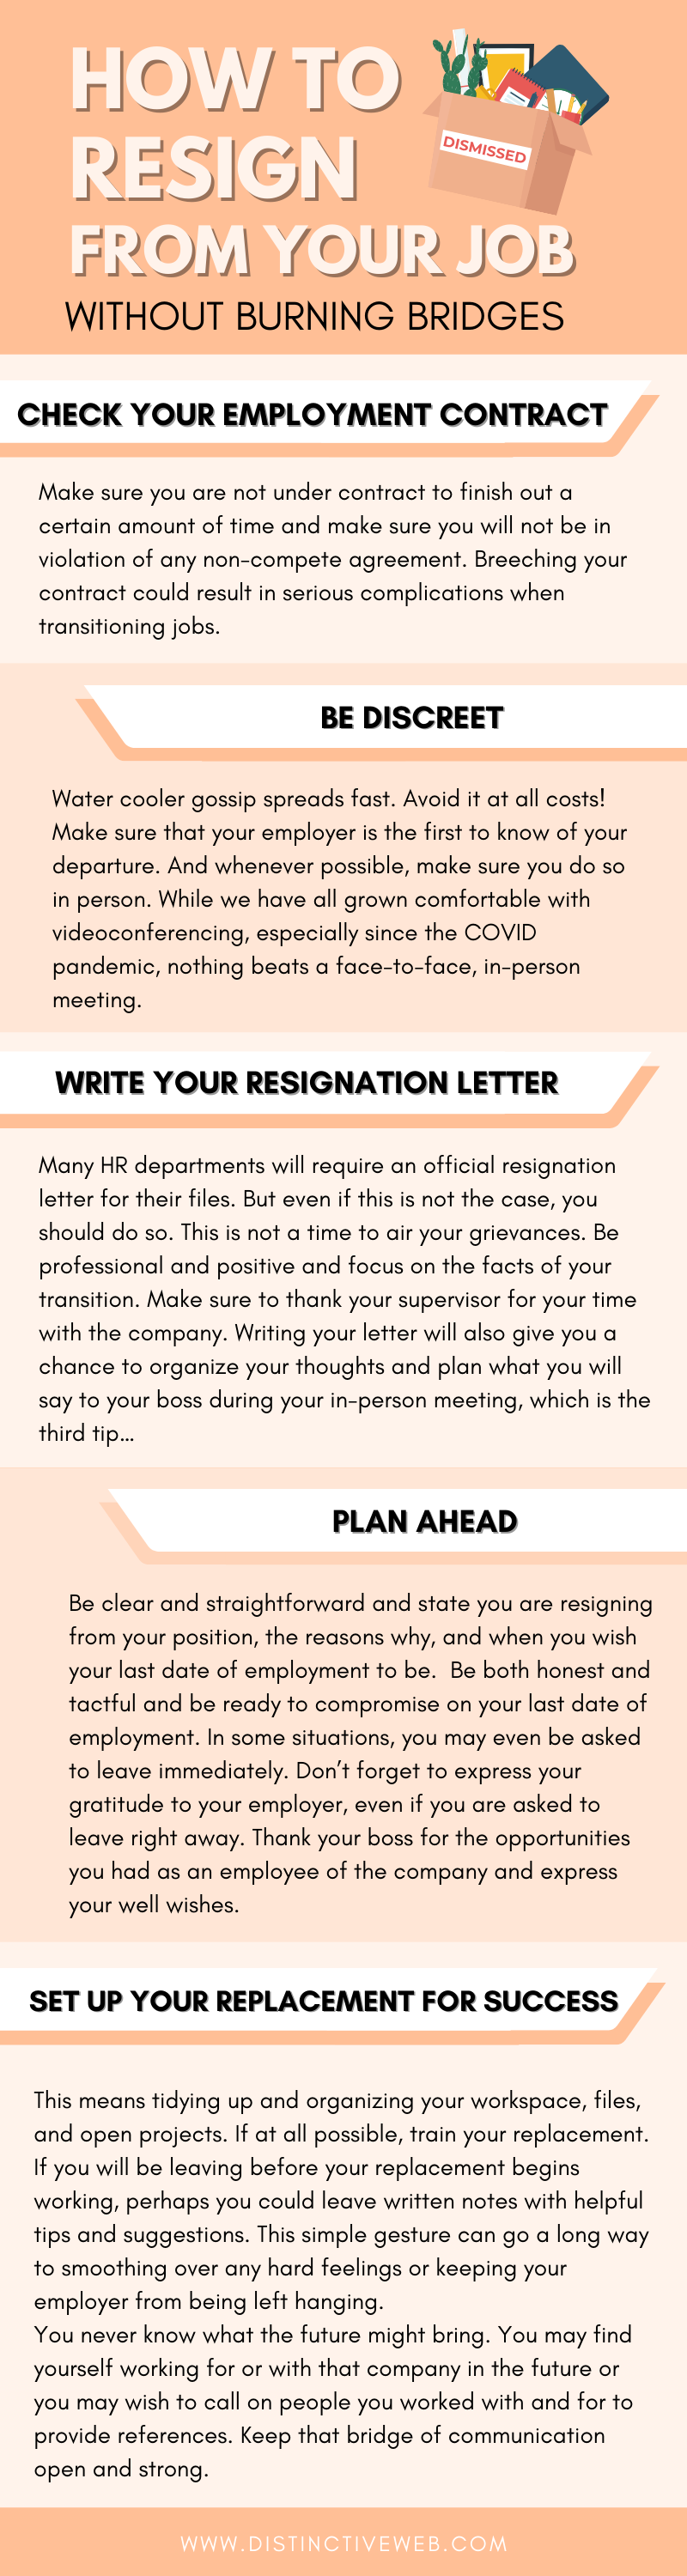 How to resign from your job without burning bridges 1